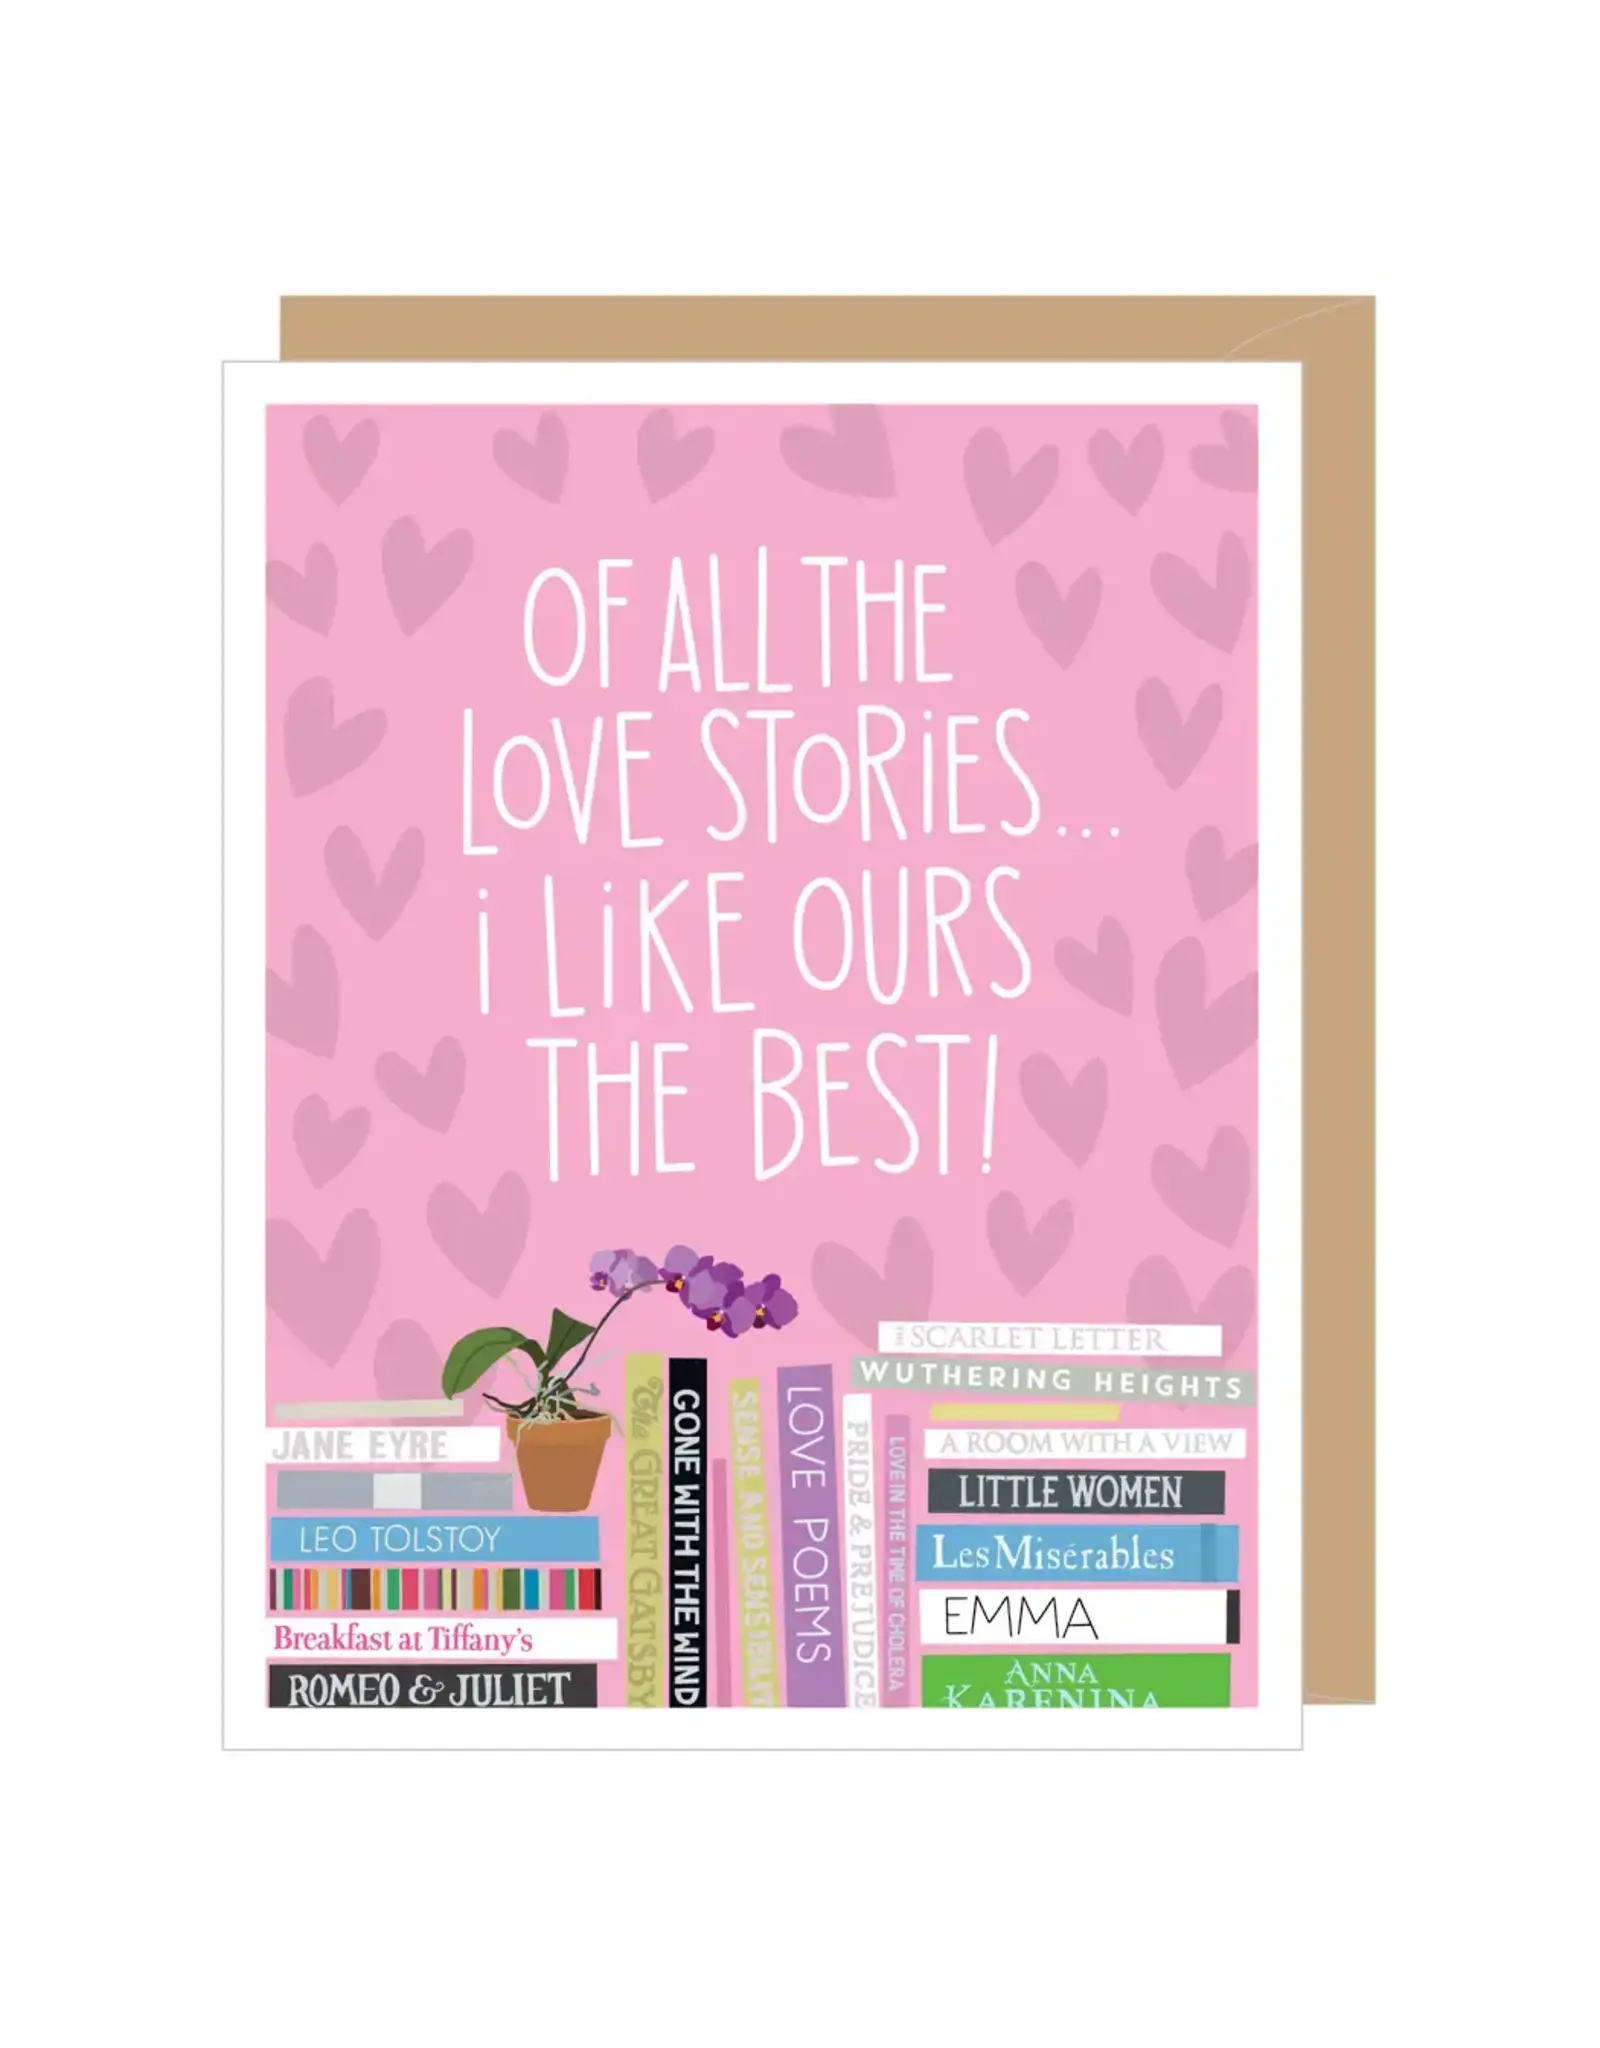 Apartment 2 Cards/Faire Love Stories Valentine's Day Card